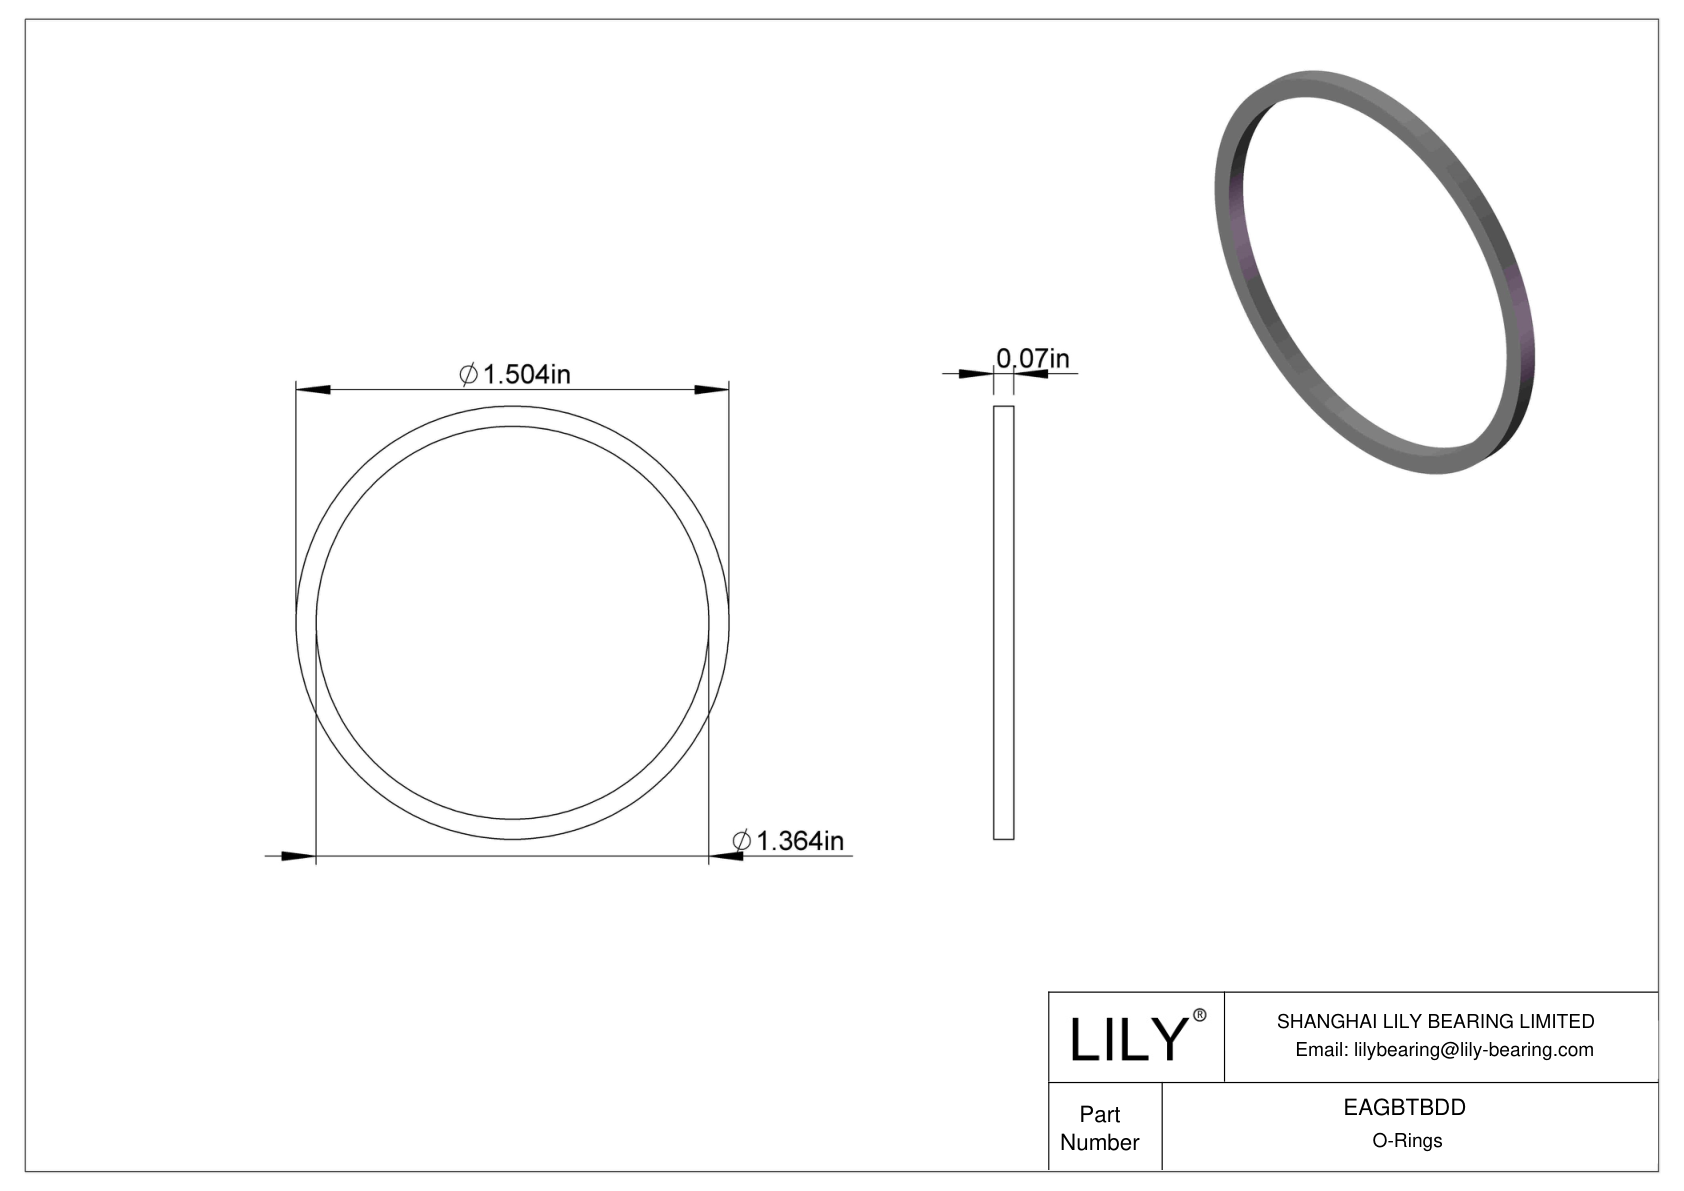 EAGBTBDD Oil Resistant O-Rings Square cad drawing